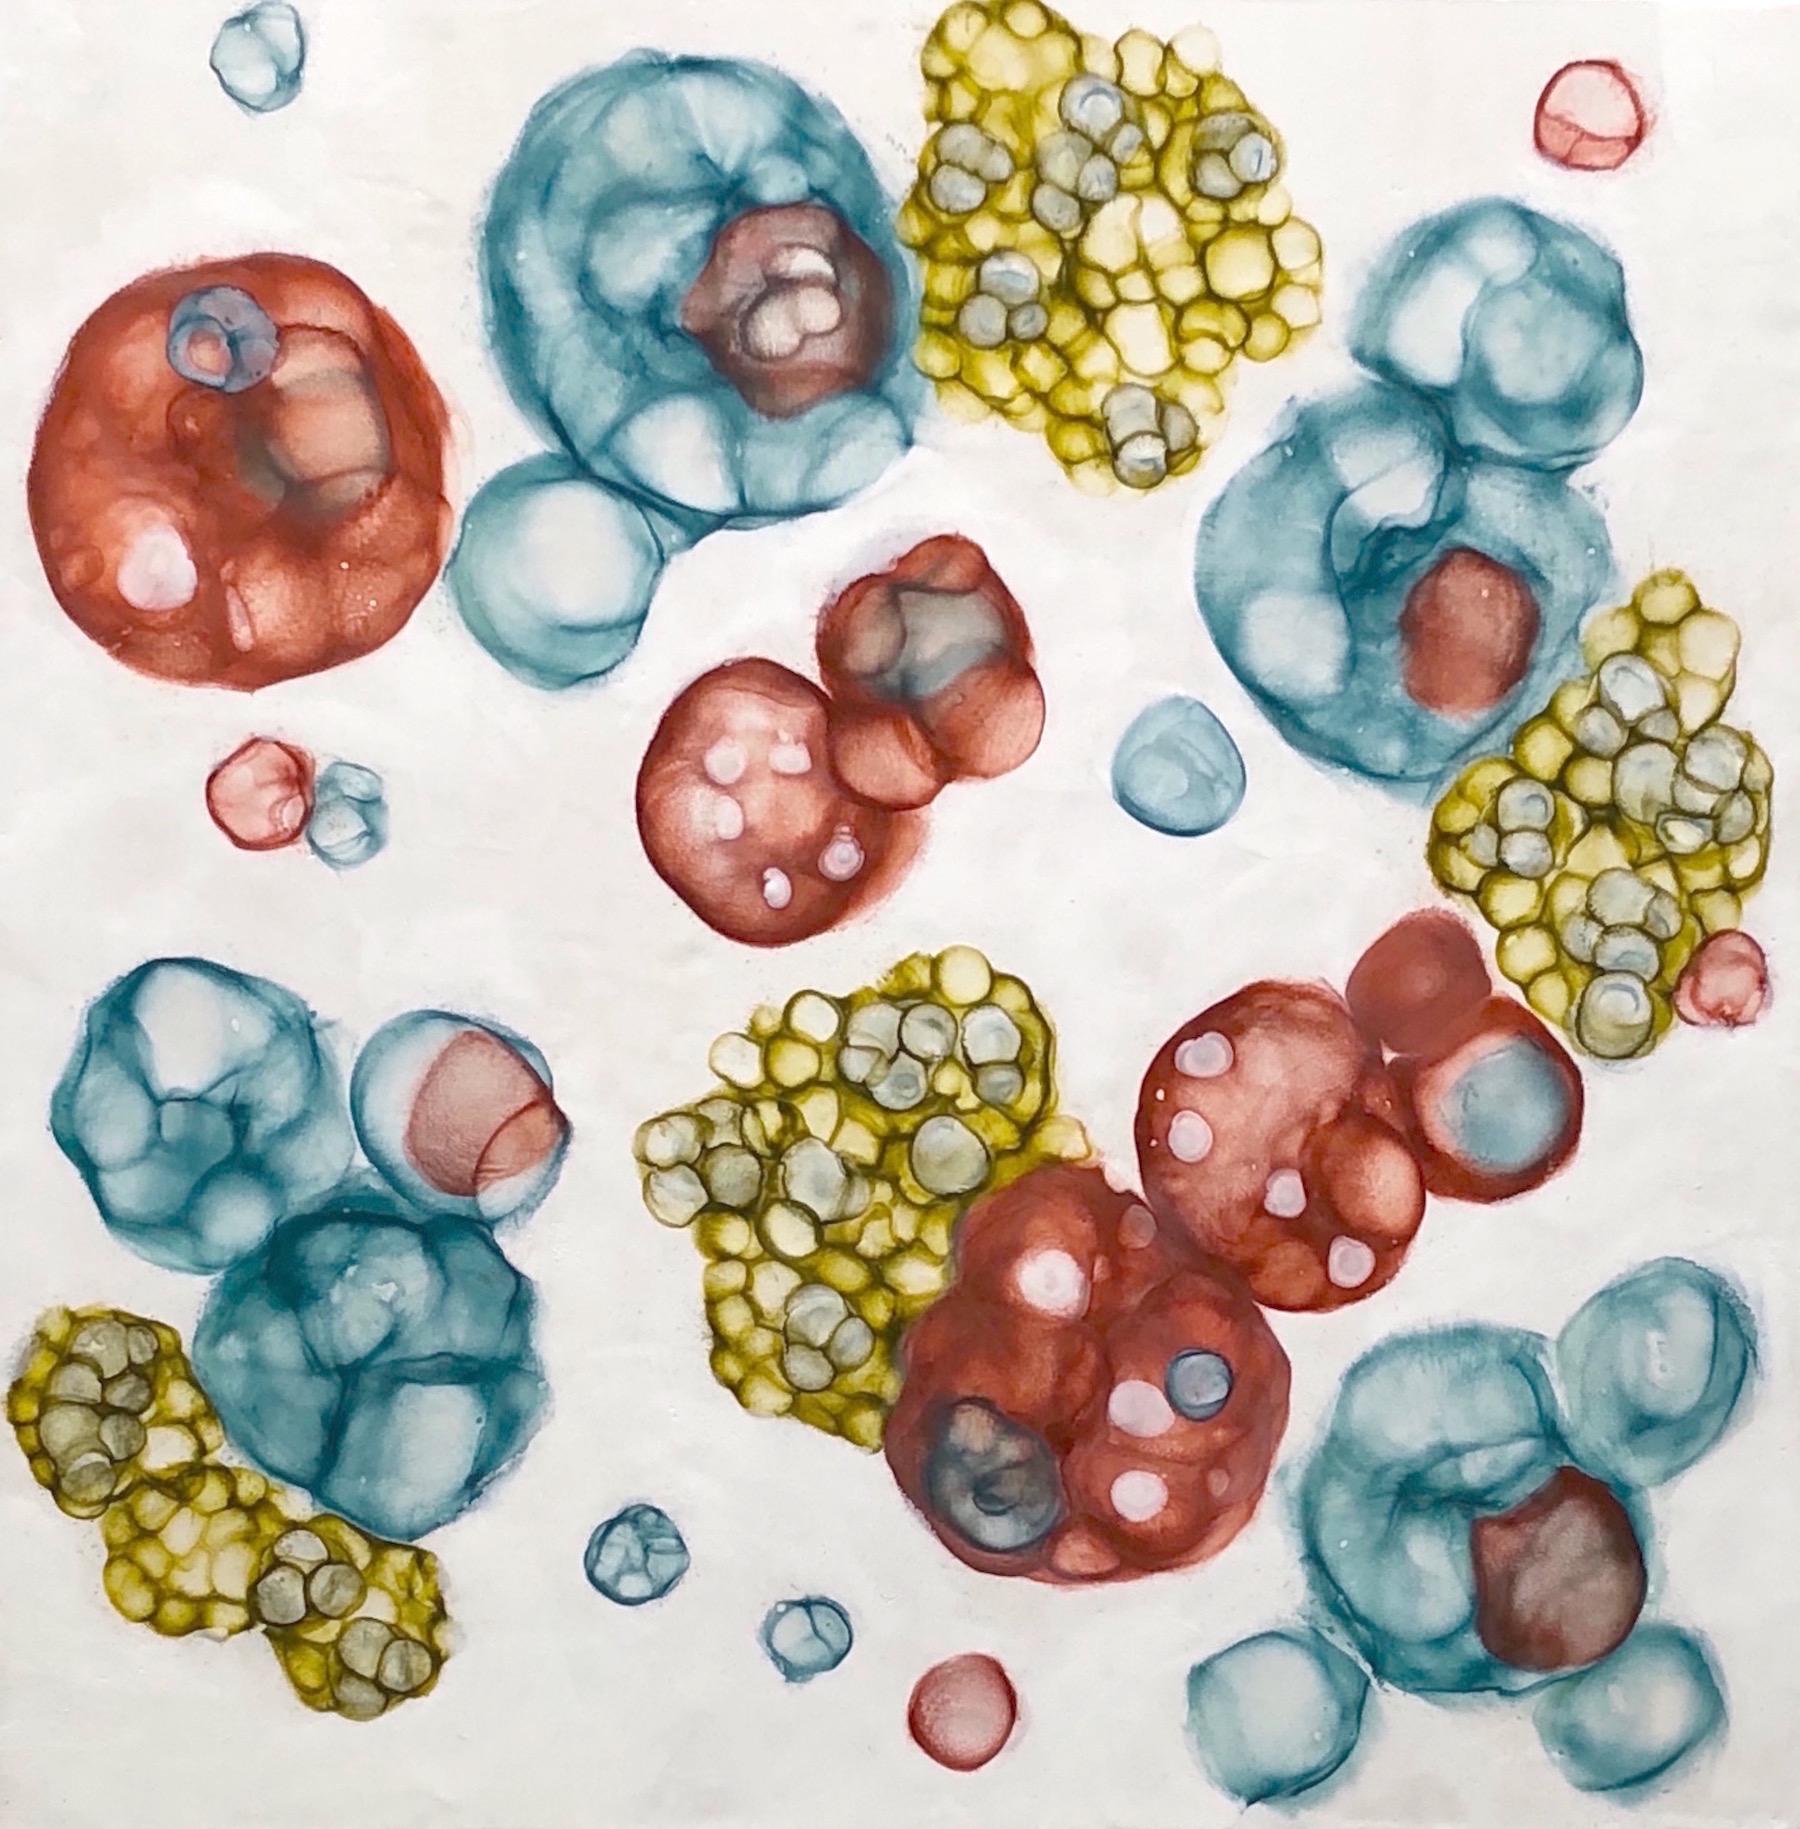 "Bio Flow 23", encaustic, microscopic, teal, rust, yellow, green, abstract - Painting by Kay Hartung